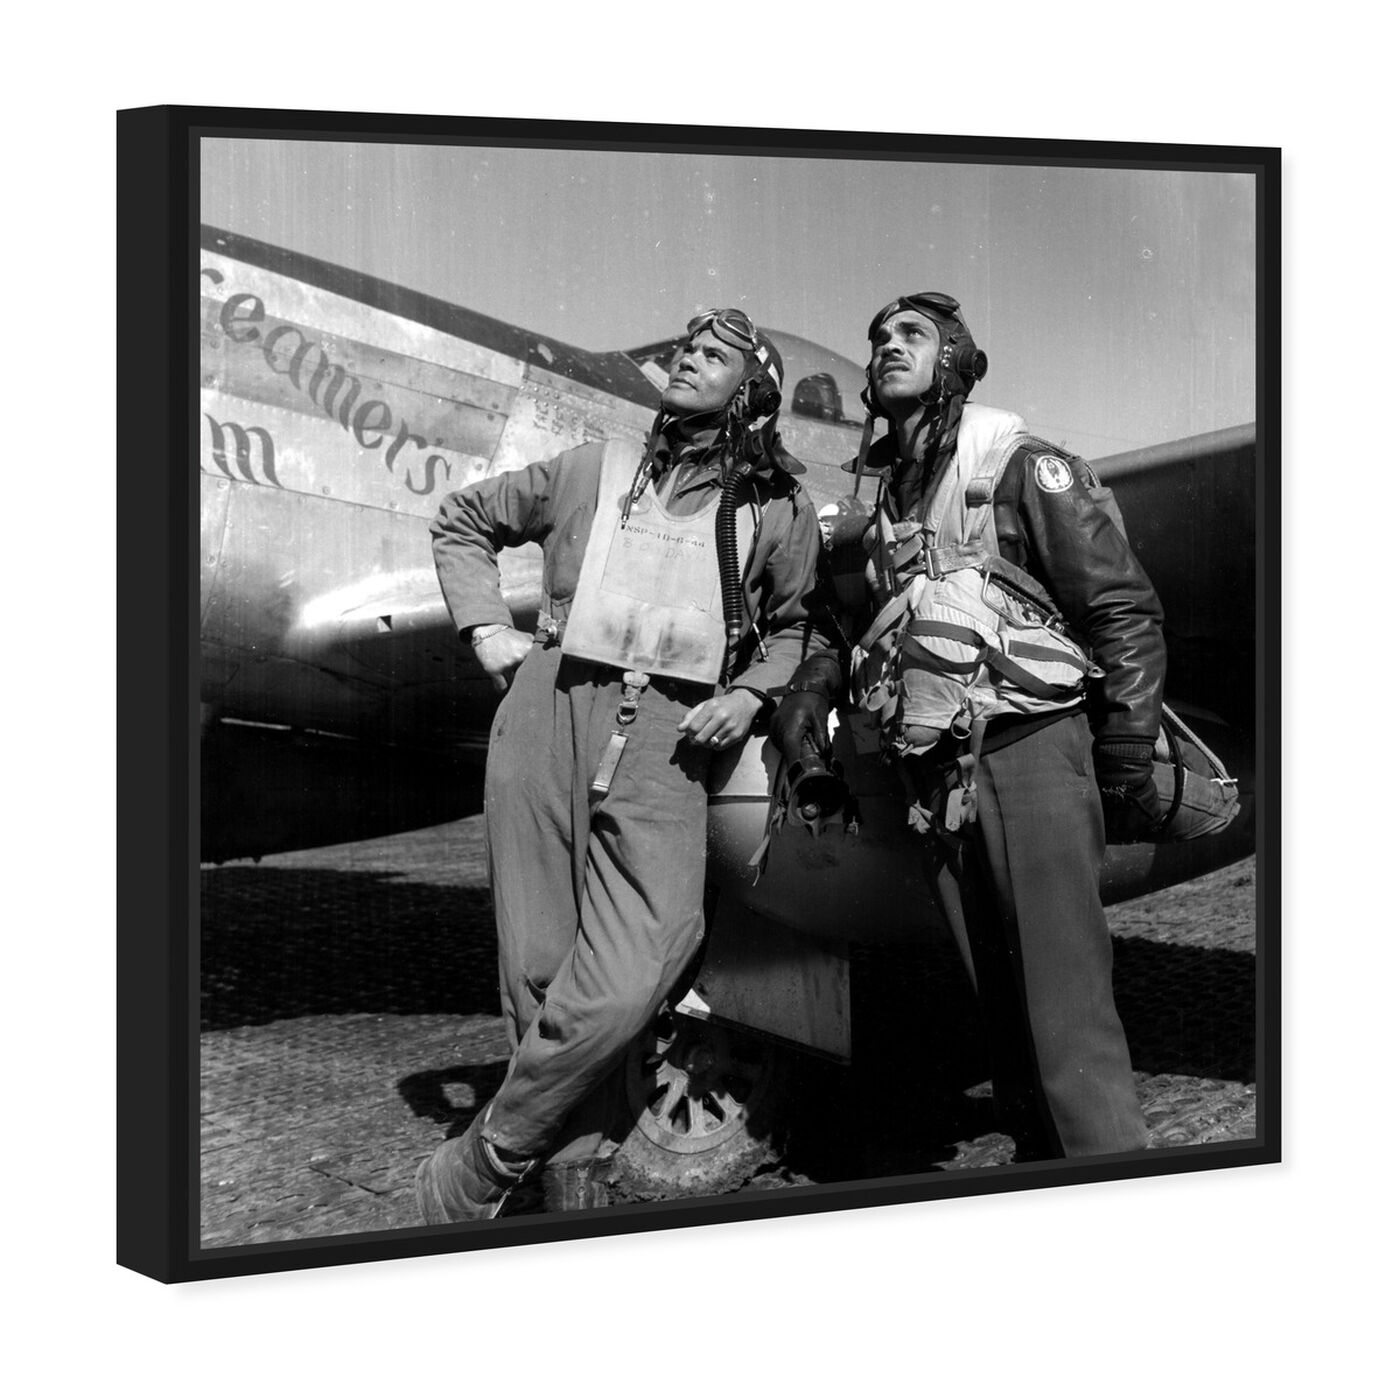 Angled view of Pilots featuring transportation and air transportation art.